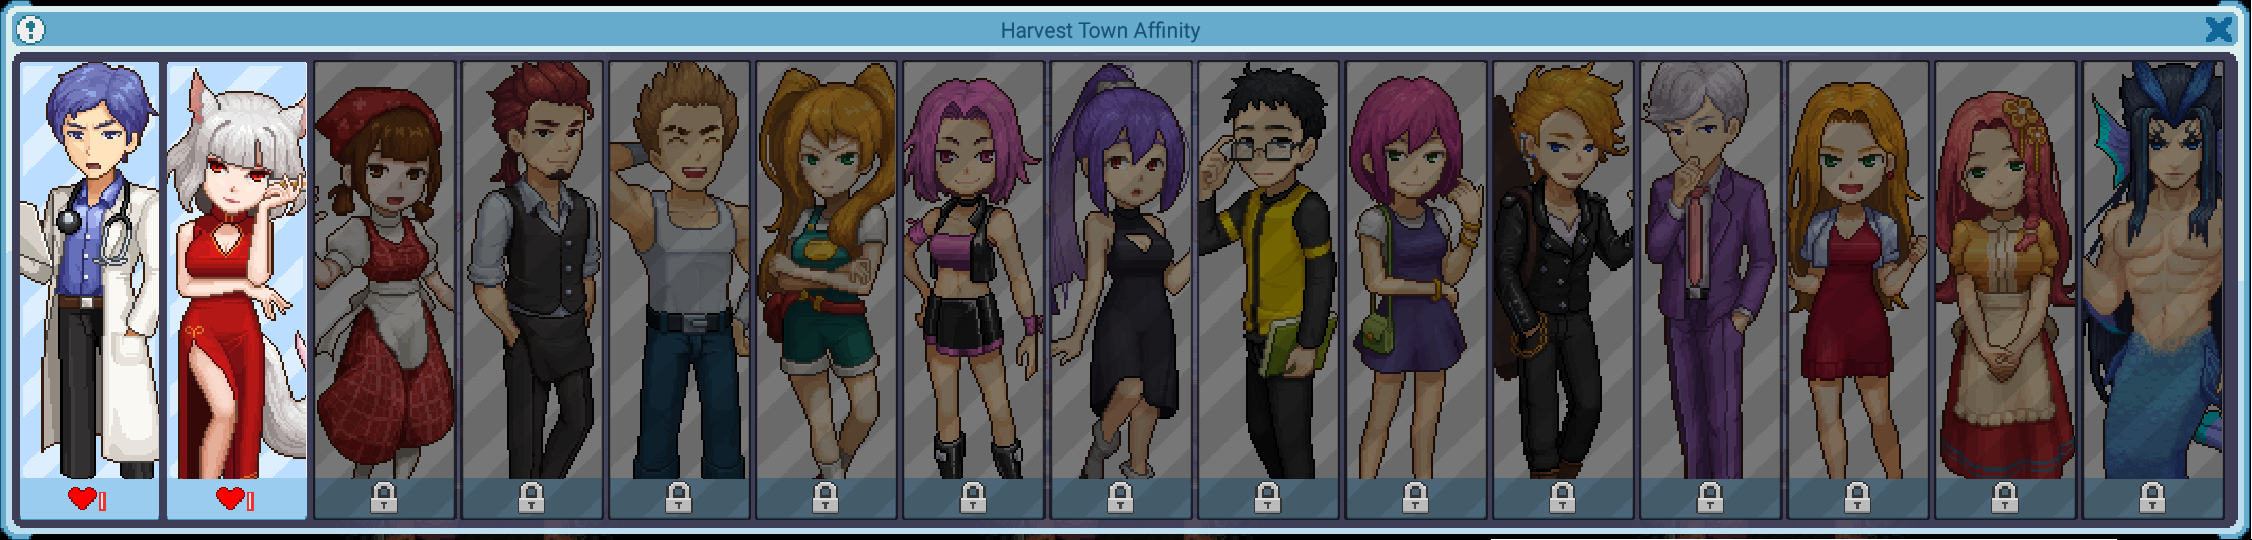 Harvest Town Affinity, Harvest Town Wiki